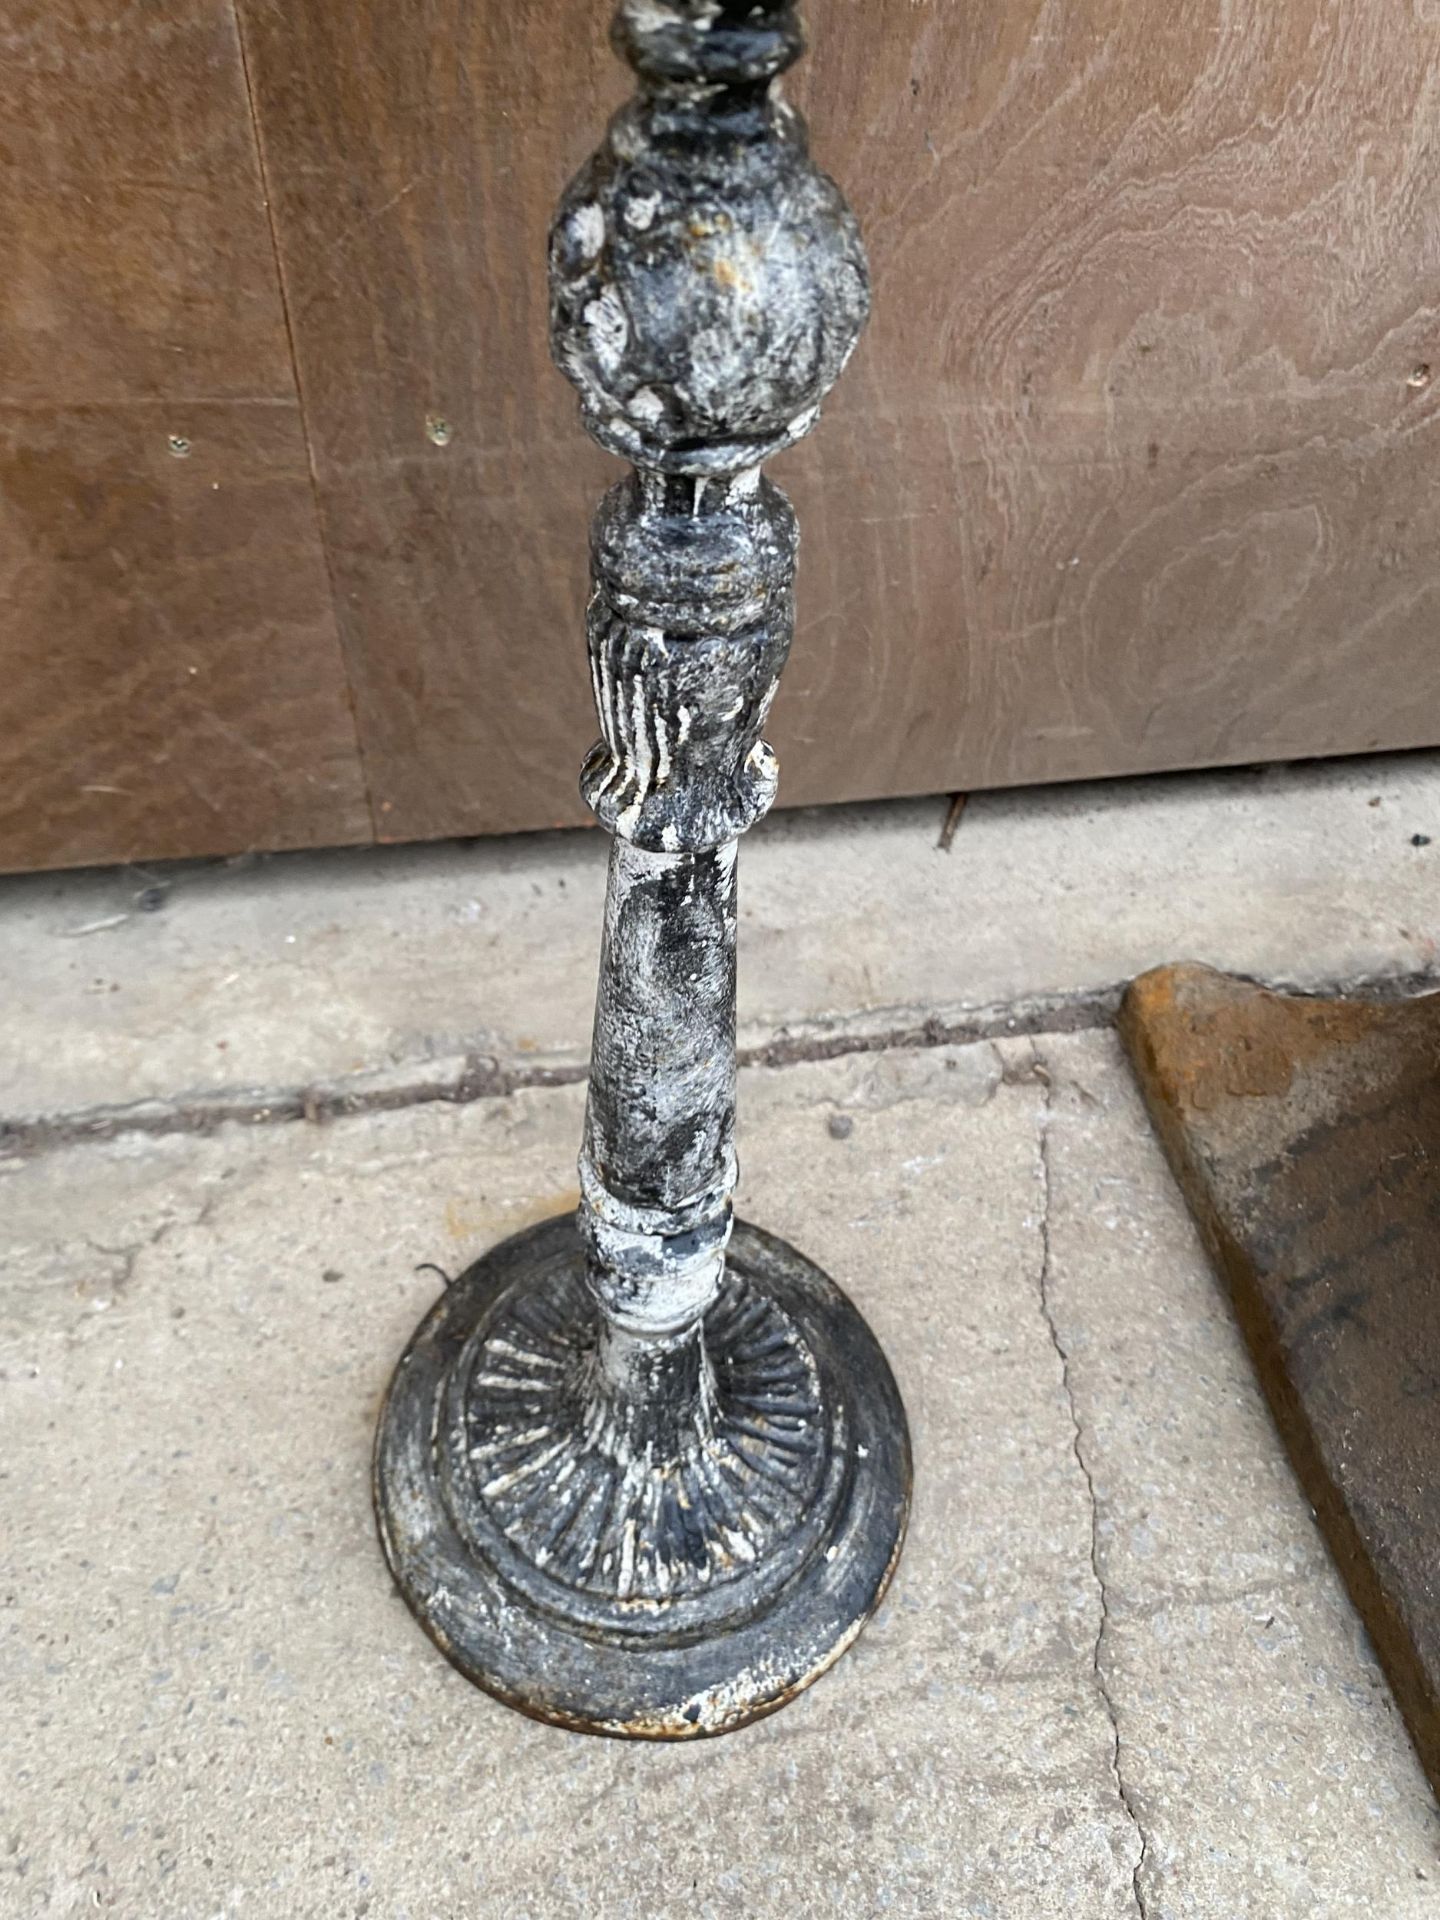 A SMALL CAST IRON BIRD TABLE WITH BIRD FIGURE (H:53CM) - Image 3 of 4